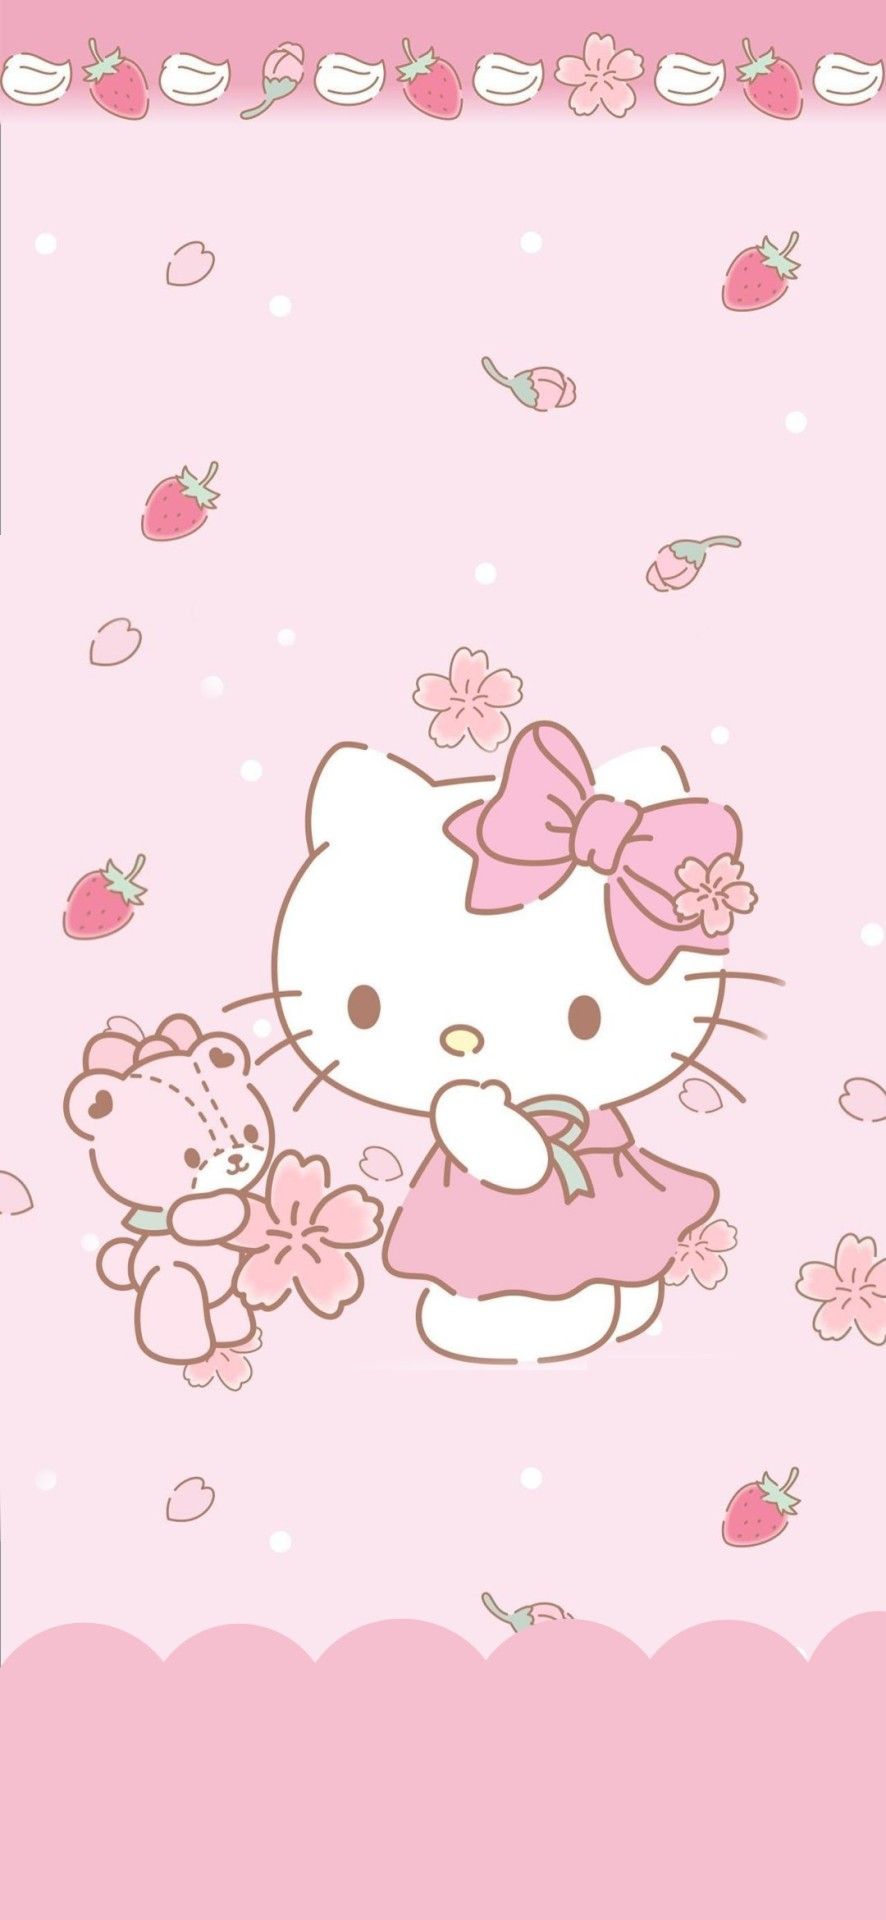 IPhone wallpaper with Hello Kitty, pink background, and teddy bear - Hello Kitty